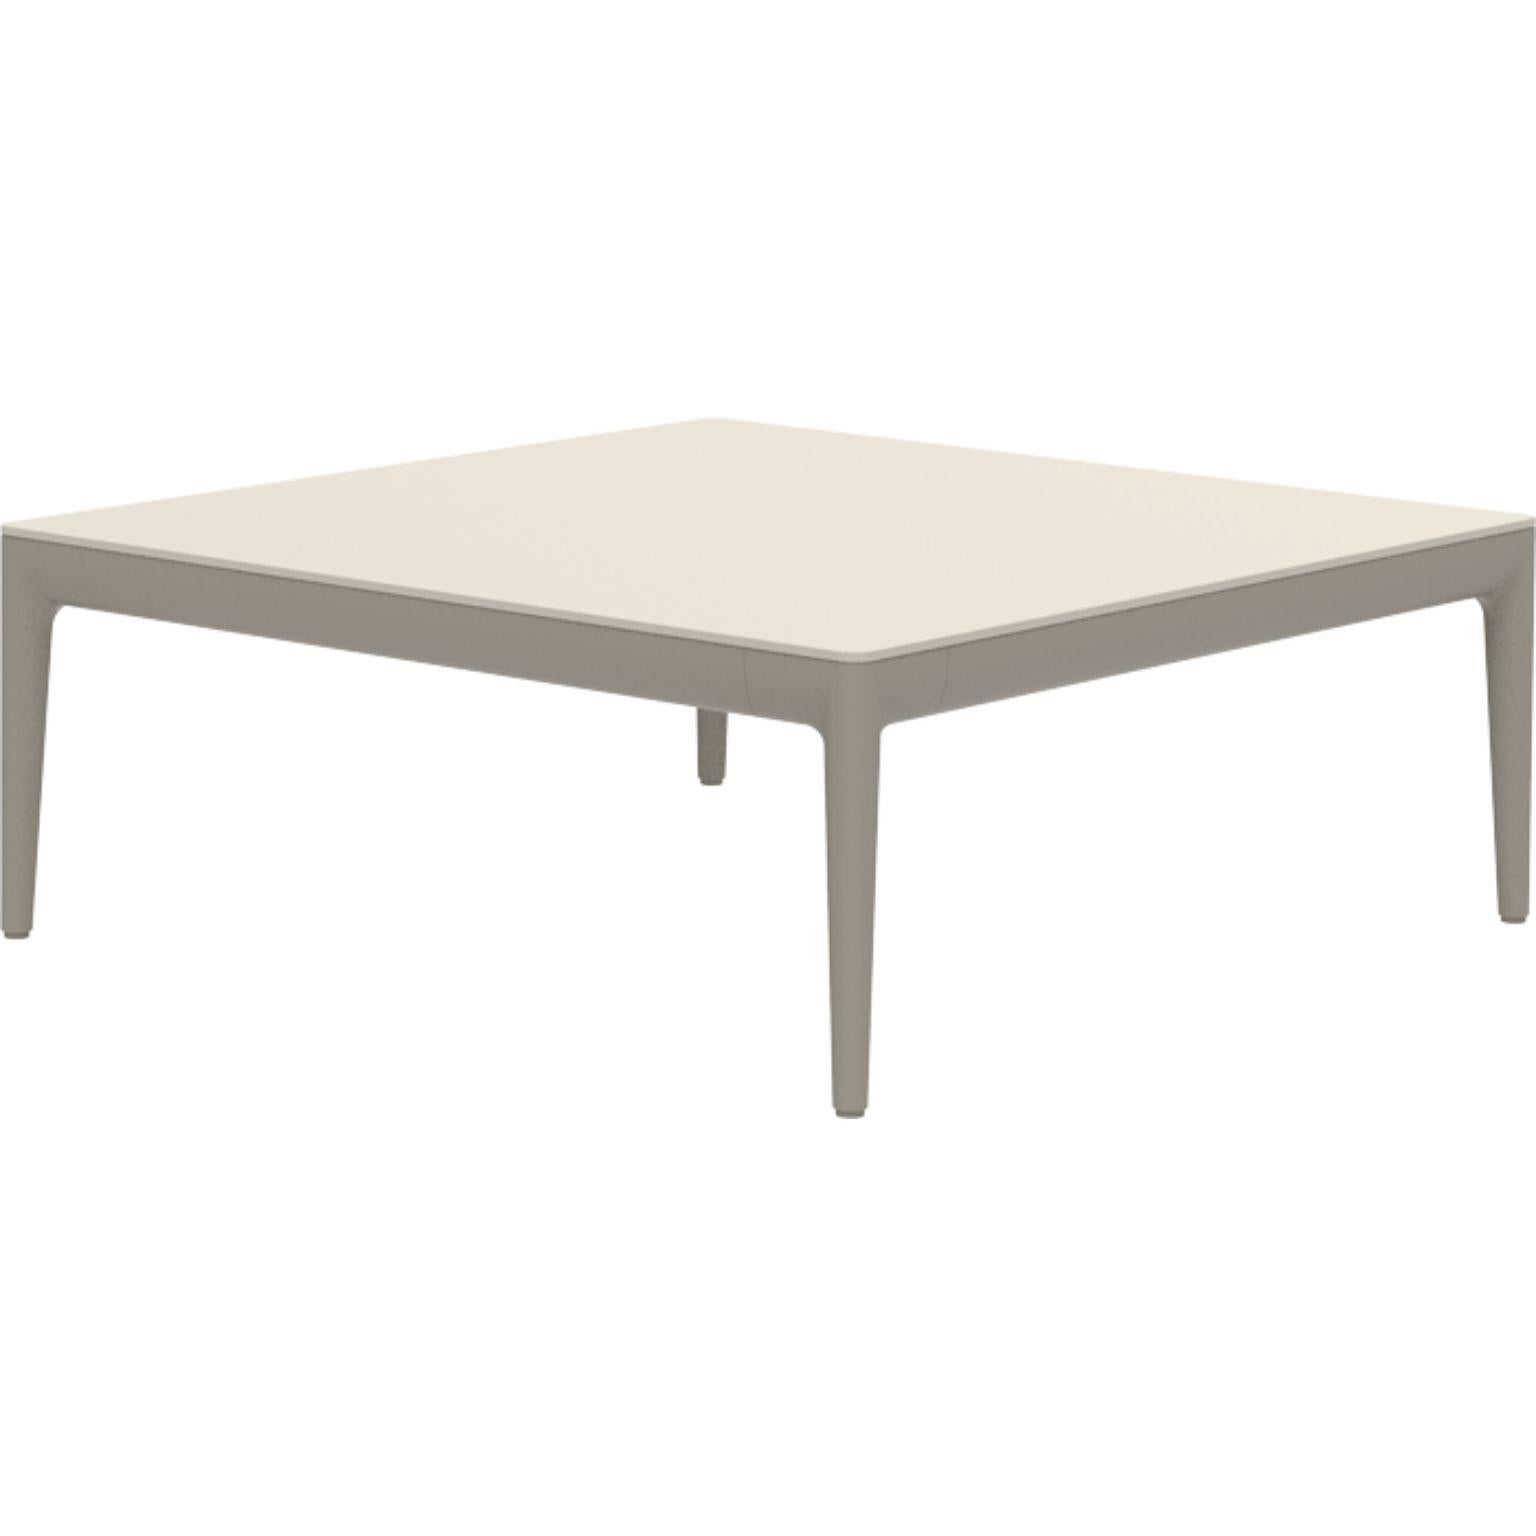 Ribbons Cream 76 Coffee Table by MOWEE.
Dimensions: D76 x W76 x H29 cm.
Material: Aluminum and HPL top.
Weight: 12 kg.
Also available in different colors and finishes. (HPL Black Edge or Neolith top). 

An unmistakable collection for its